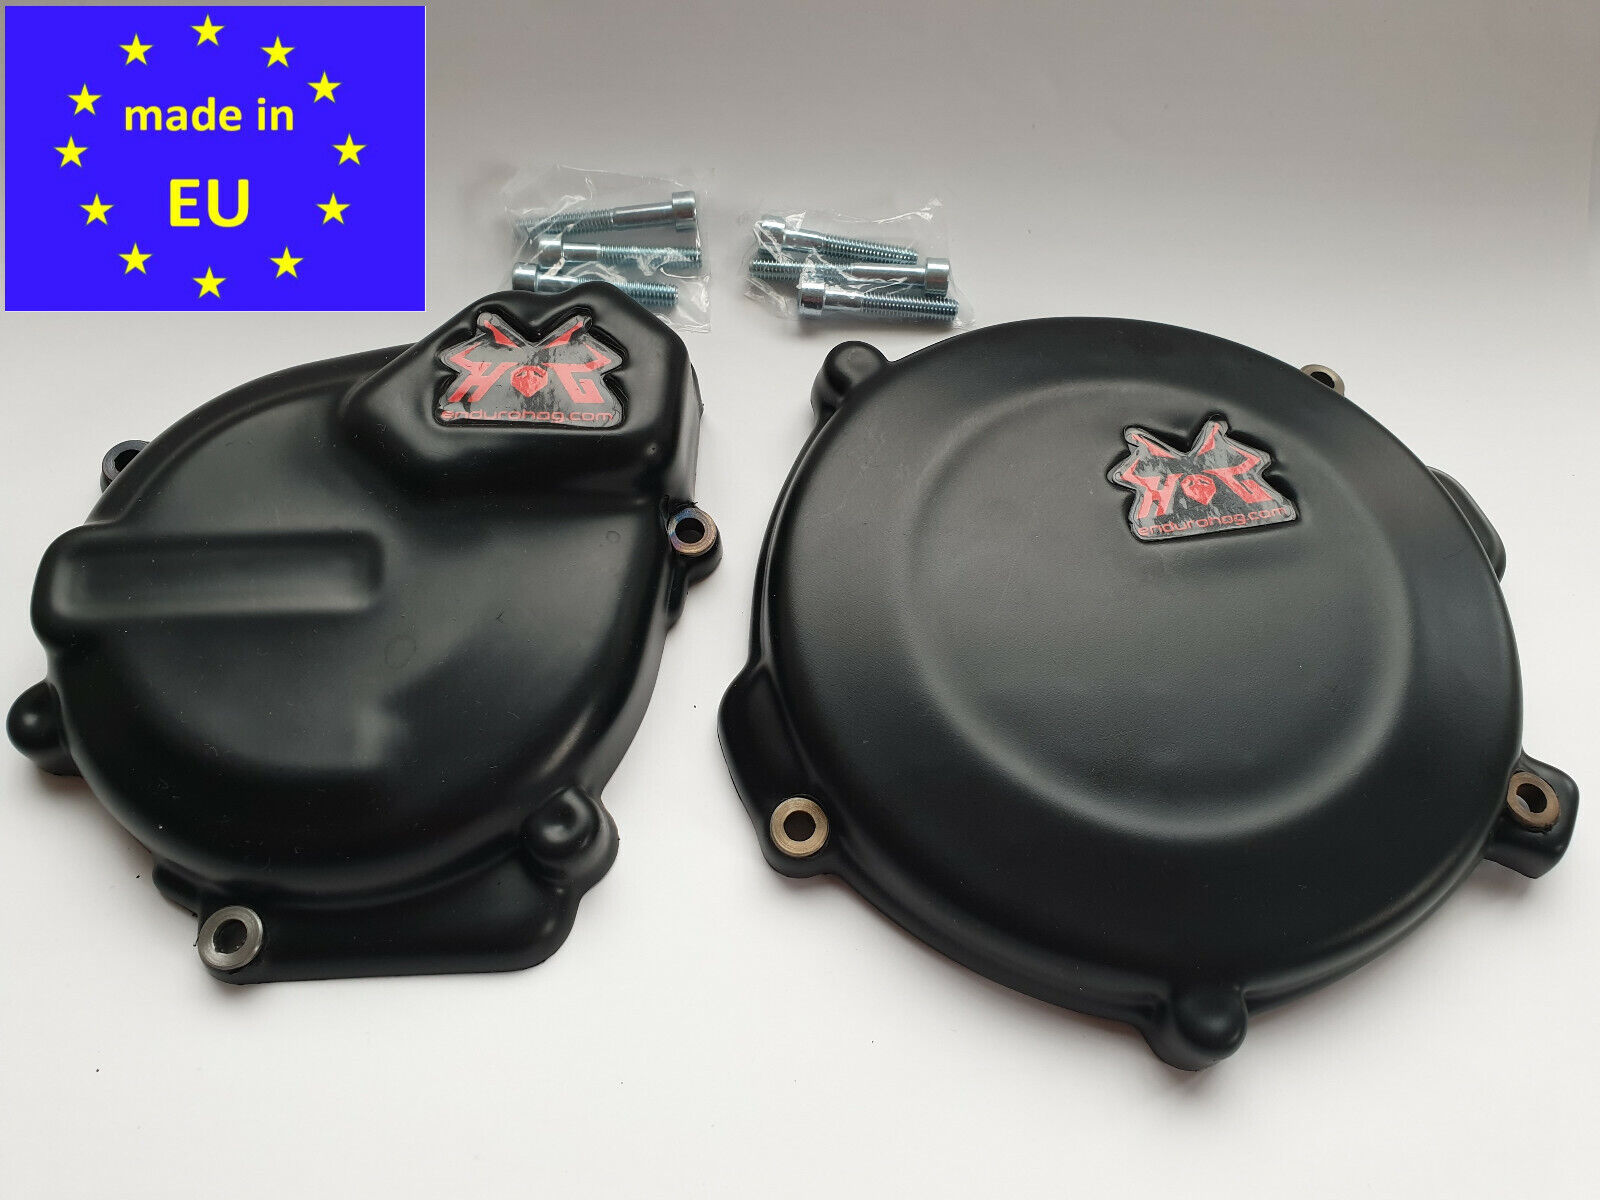 2016-23 SWM RS300/500 AJP SPR 310/510 protection SET ignition + clutch cover 097